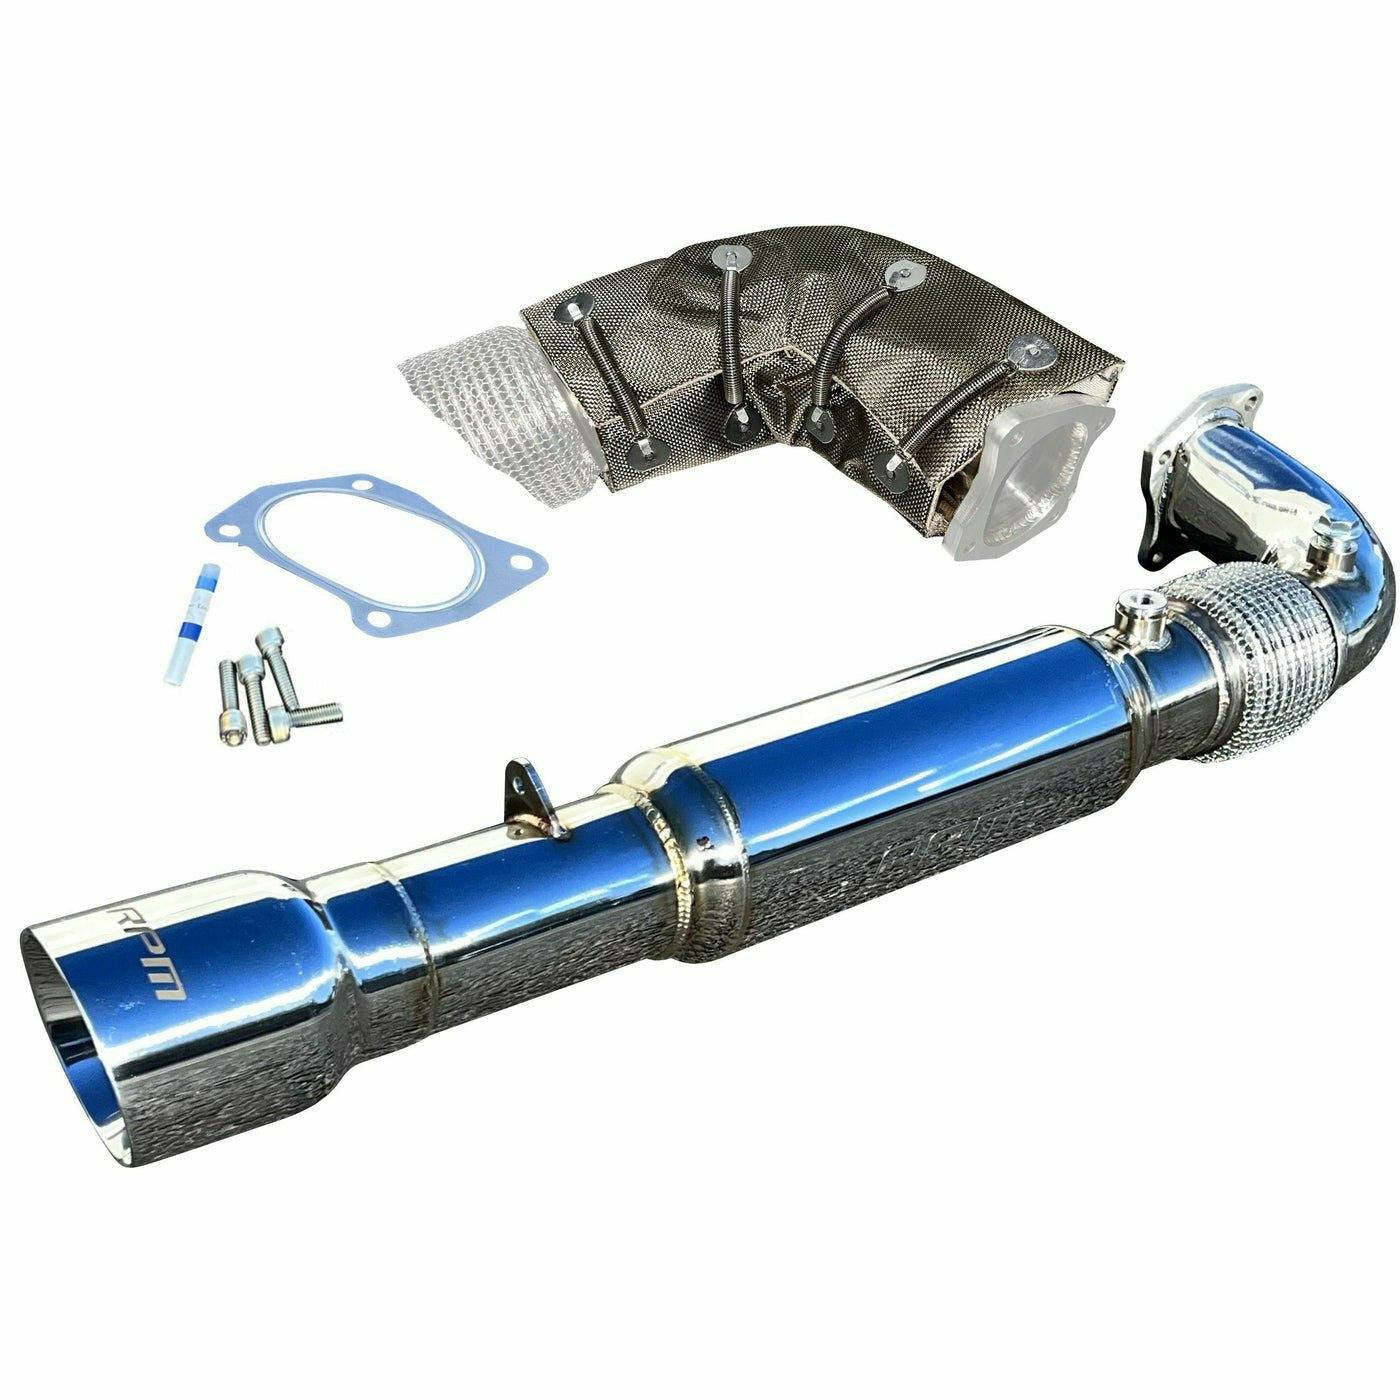 Buy Universal Car Turbo Whistle Muffler Exhaust Pipe - Size L in Pakistan